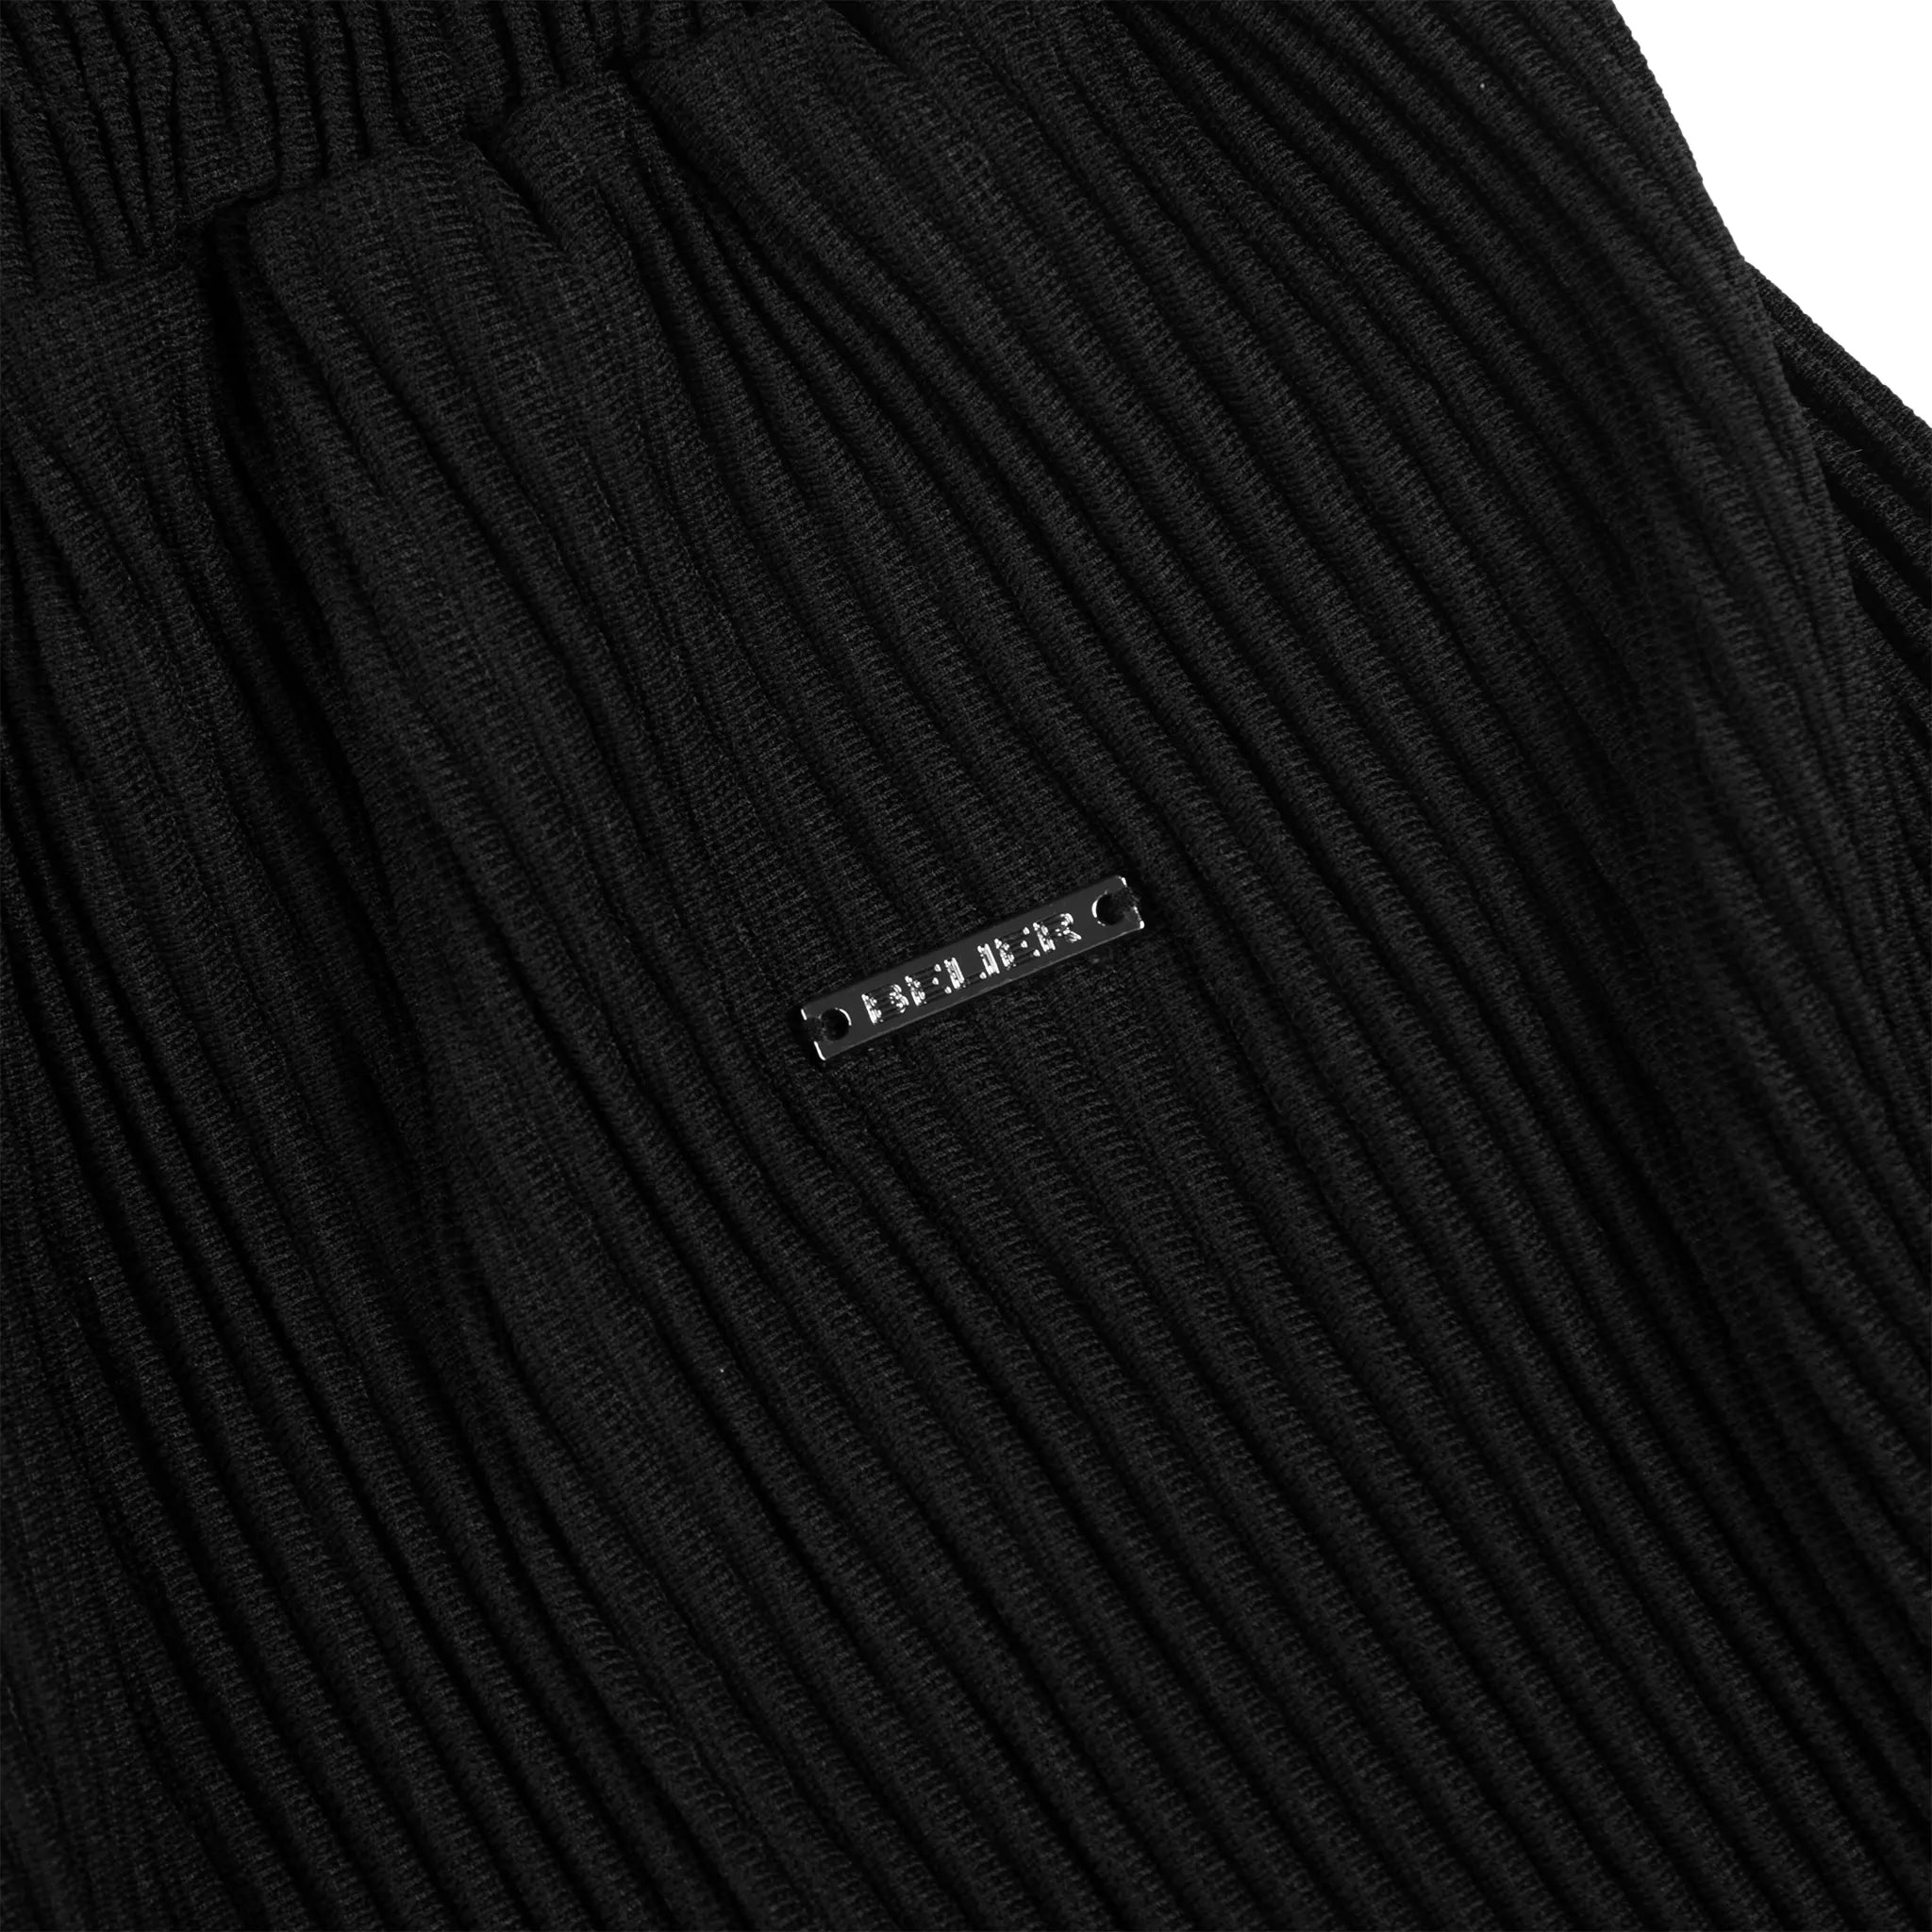 Detail view of Belier Pleated Black Shorts BM-075